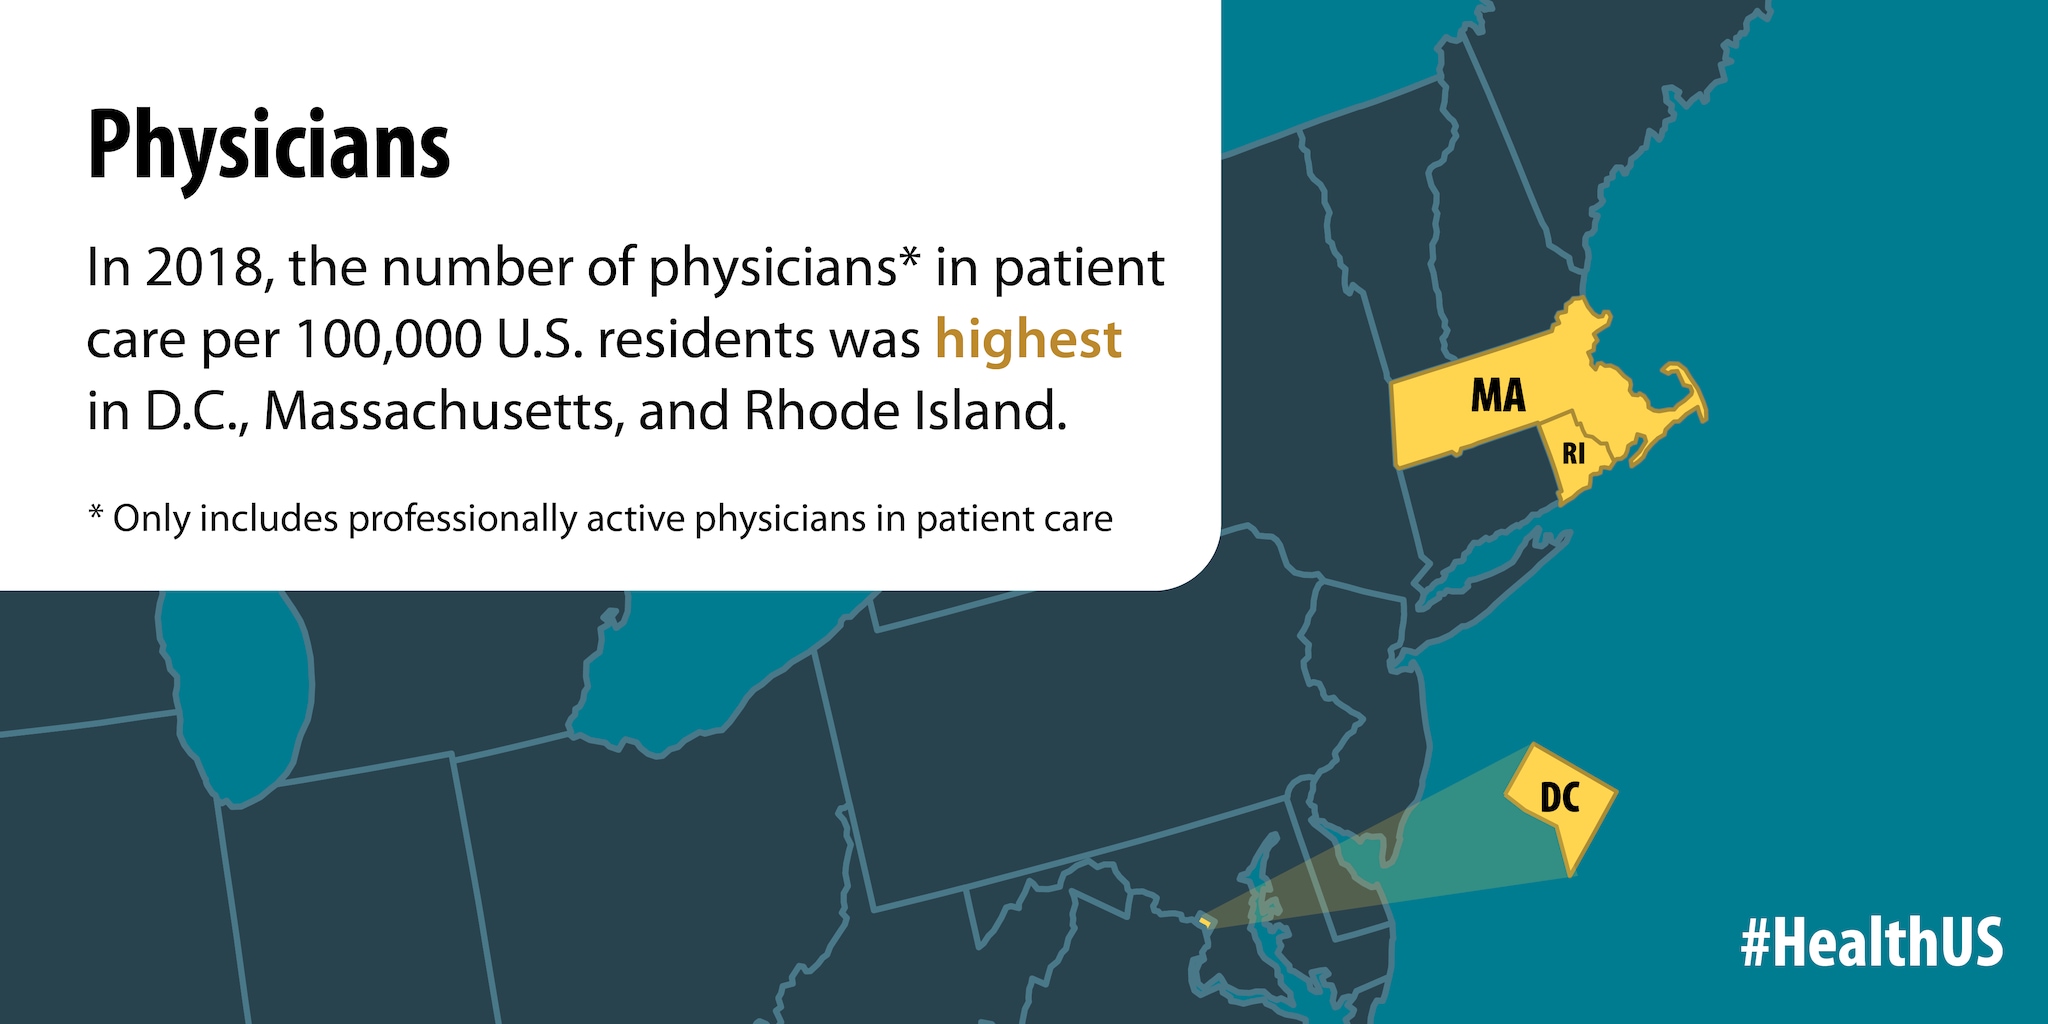 In 2018, the number of physicians in patient care per 100,000 U.S. residents was highest in D.C., Massachusetts, and Rhode Island.